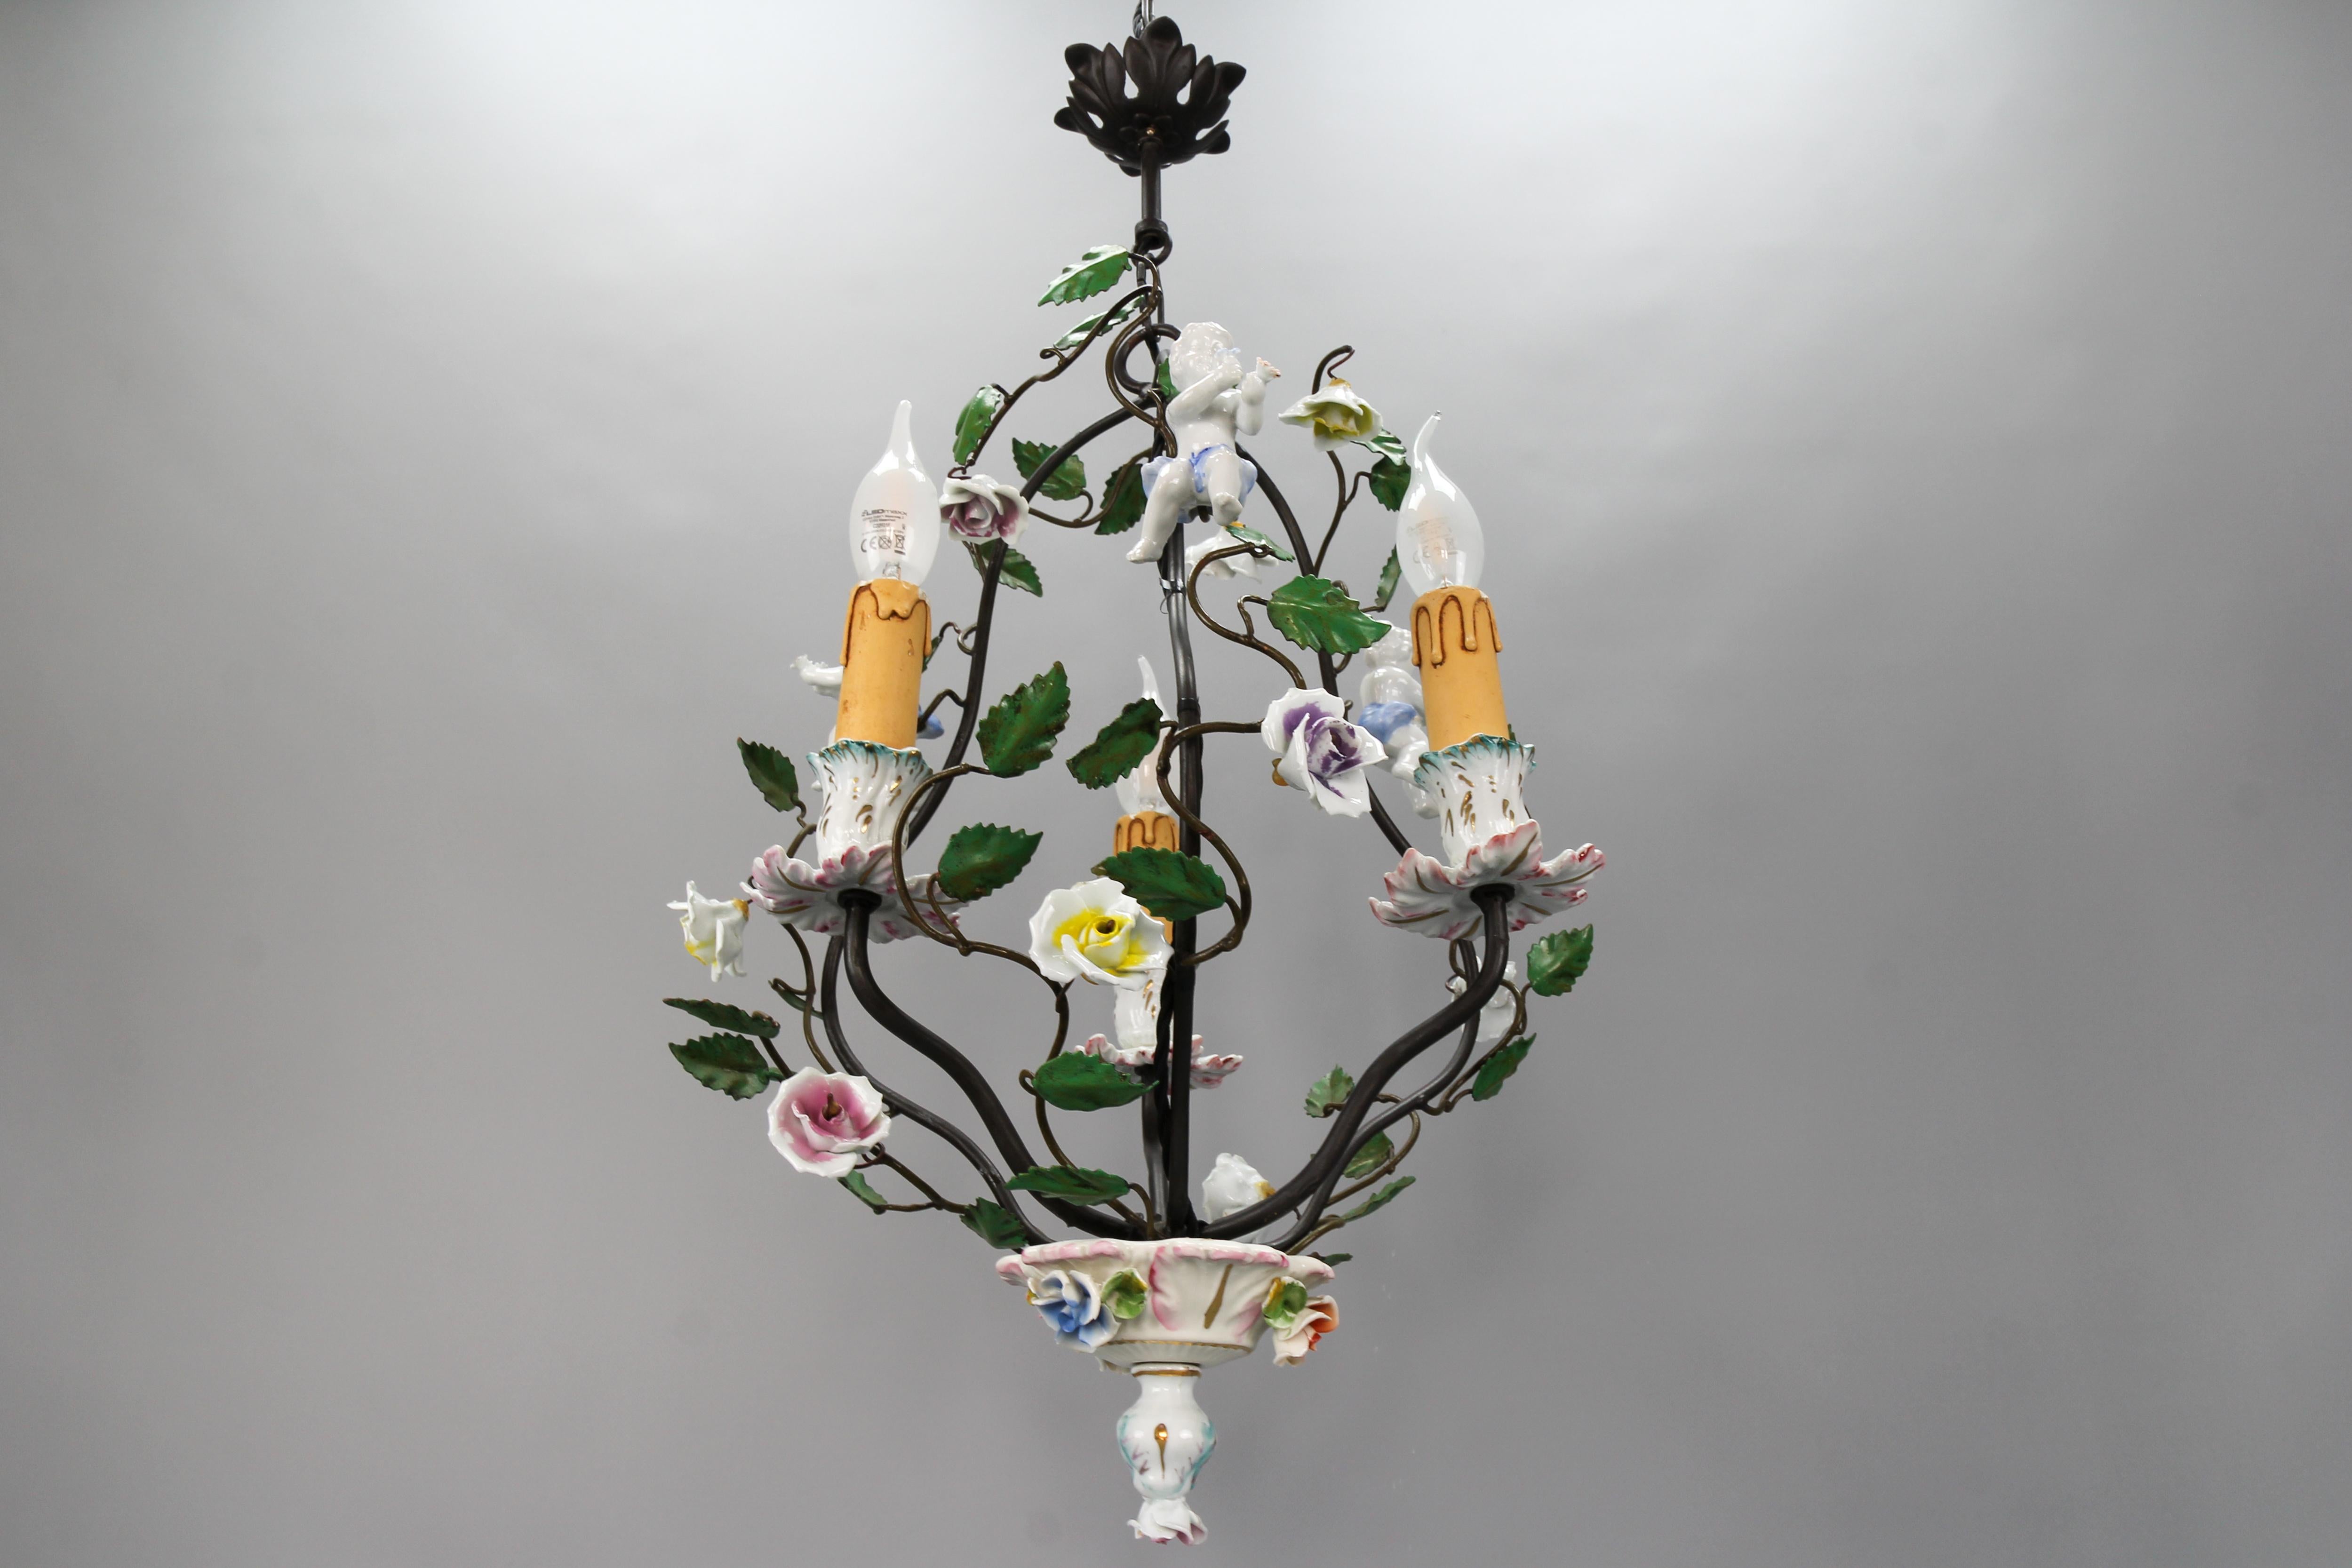 Rococo Style Porcelain Cherub and Metal Three-Light Chandelier, Germany, circa the 1970s.
Beautiful Rococo-style metal chandelier, adorned with porcelain flowers and three porcelain cherubs.
Three sockets for E-14 size light bulbs.
Dimensions: